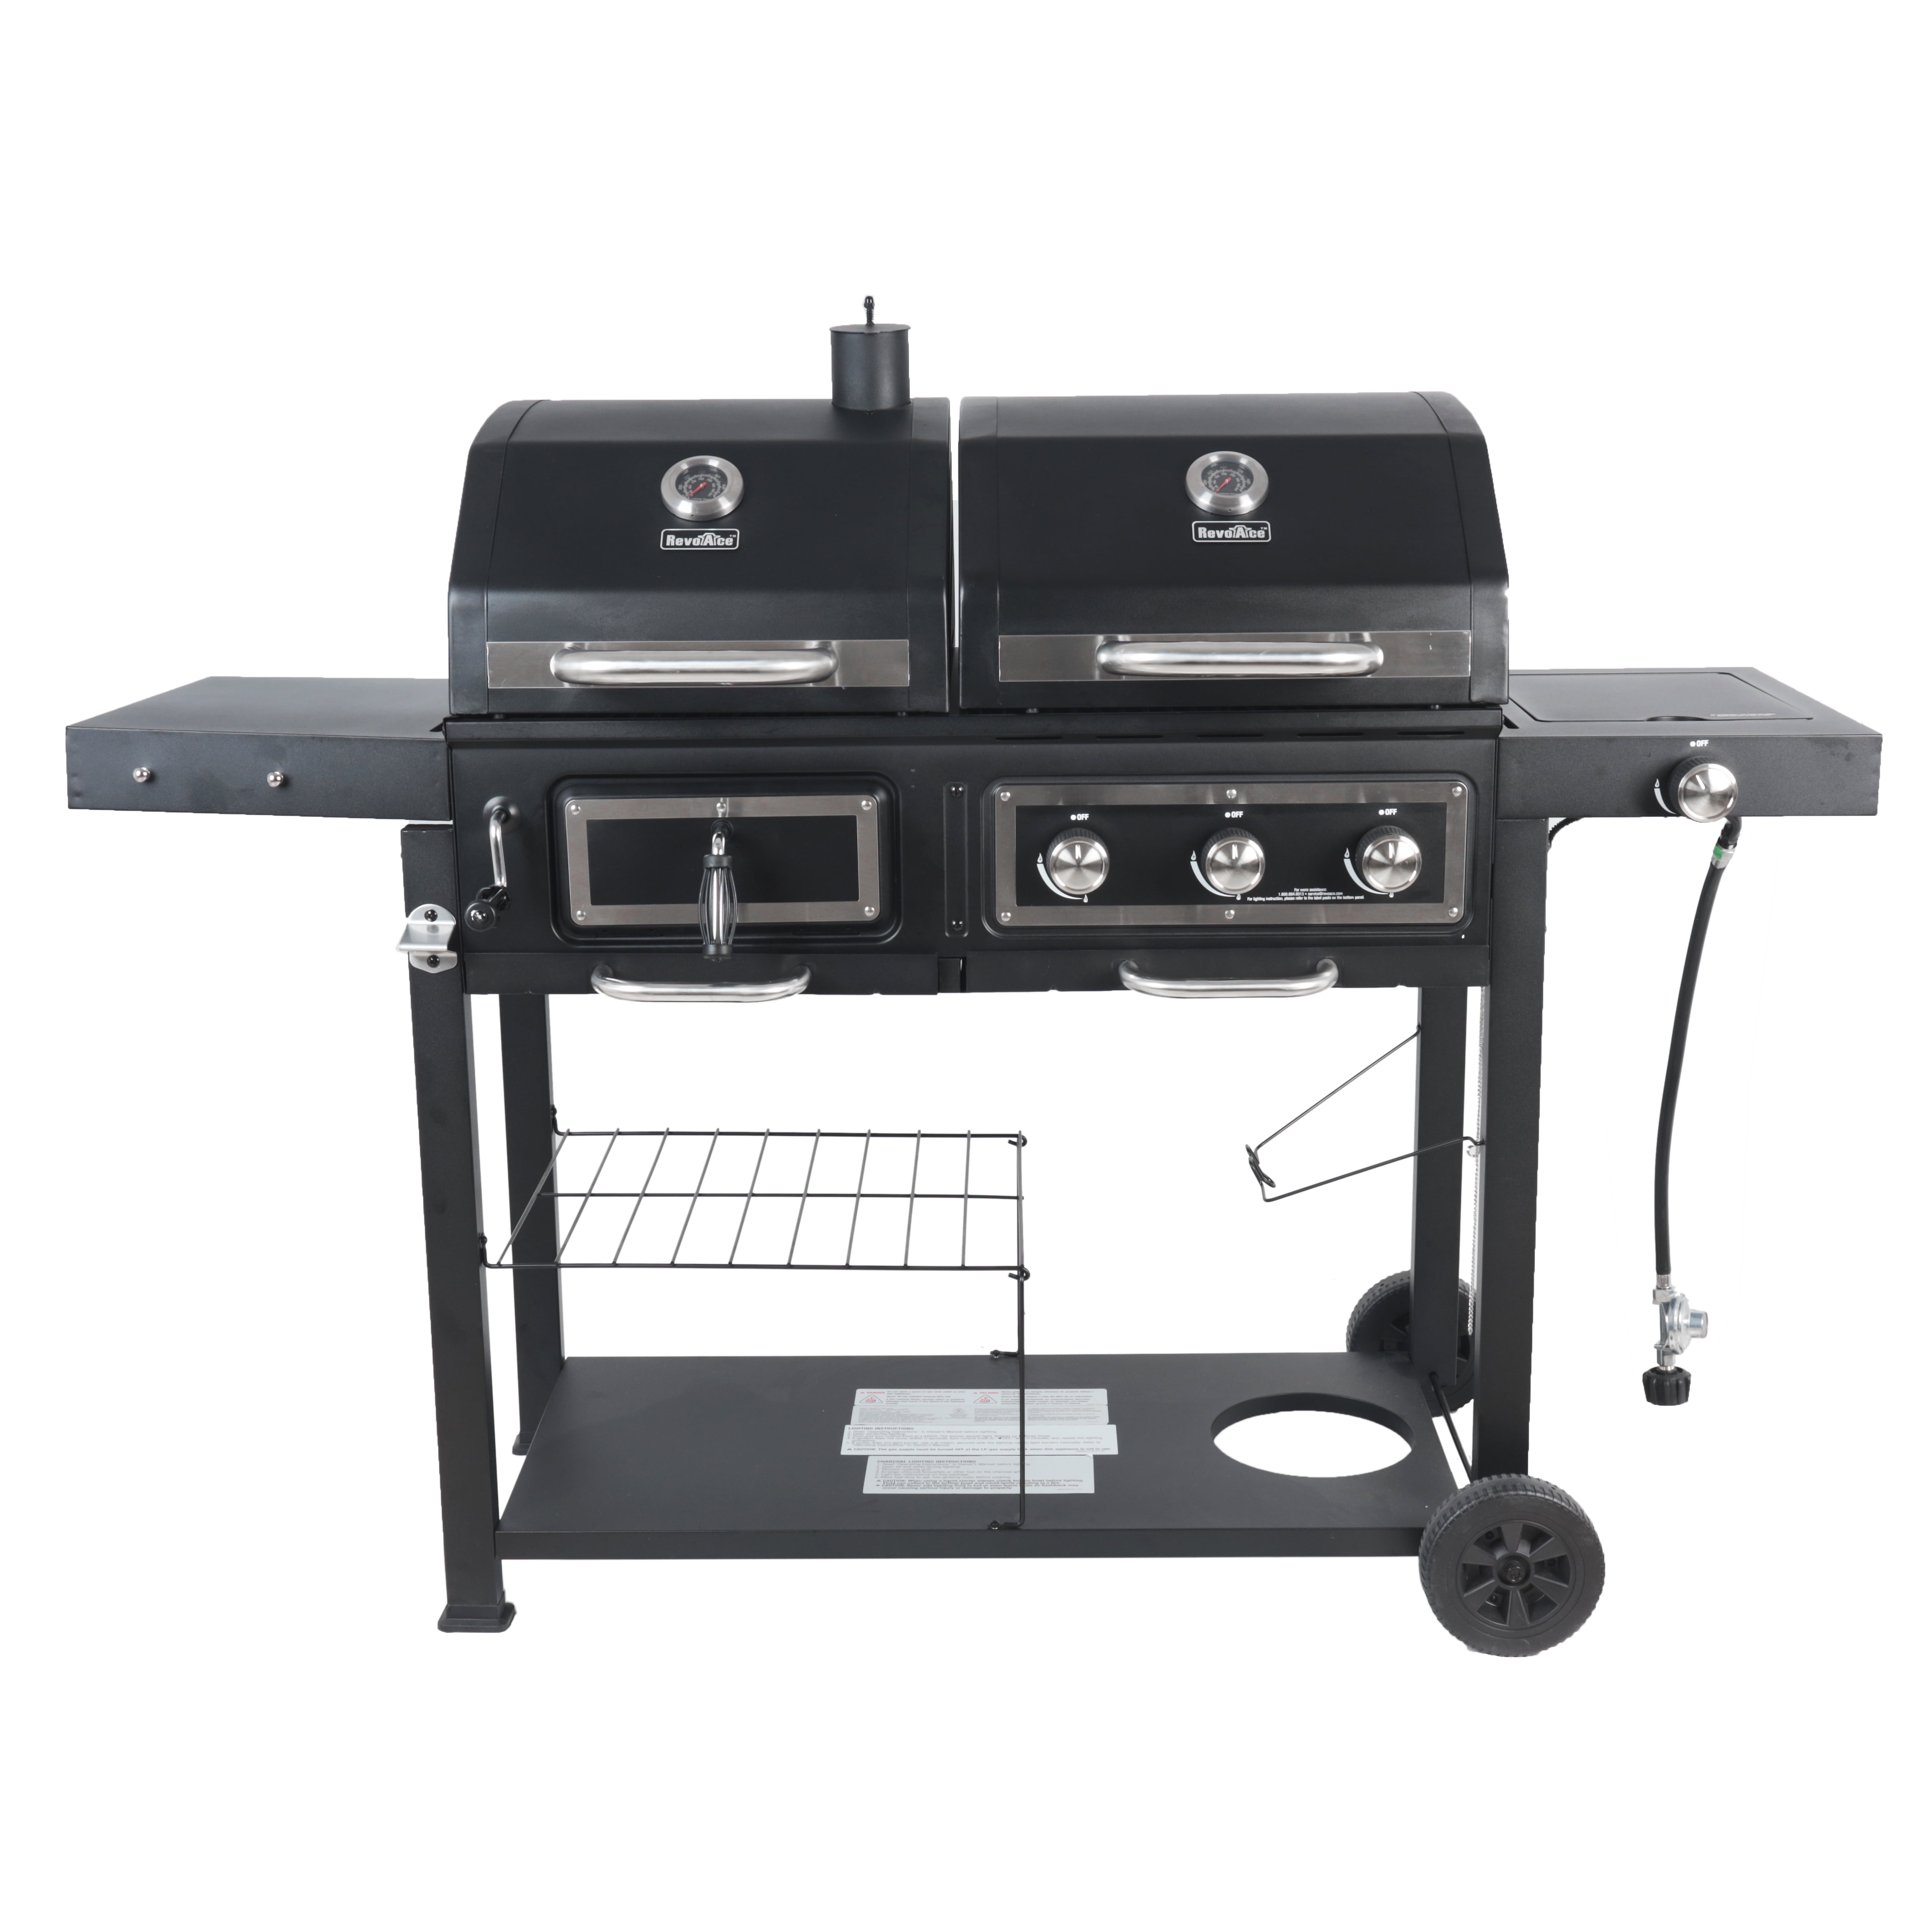 RevoAce Dual Gas & Combo Grill, Black with Stainless - Walmart.com